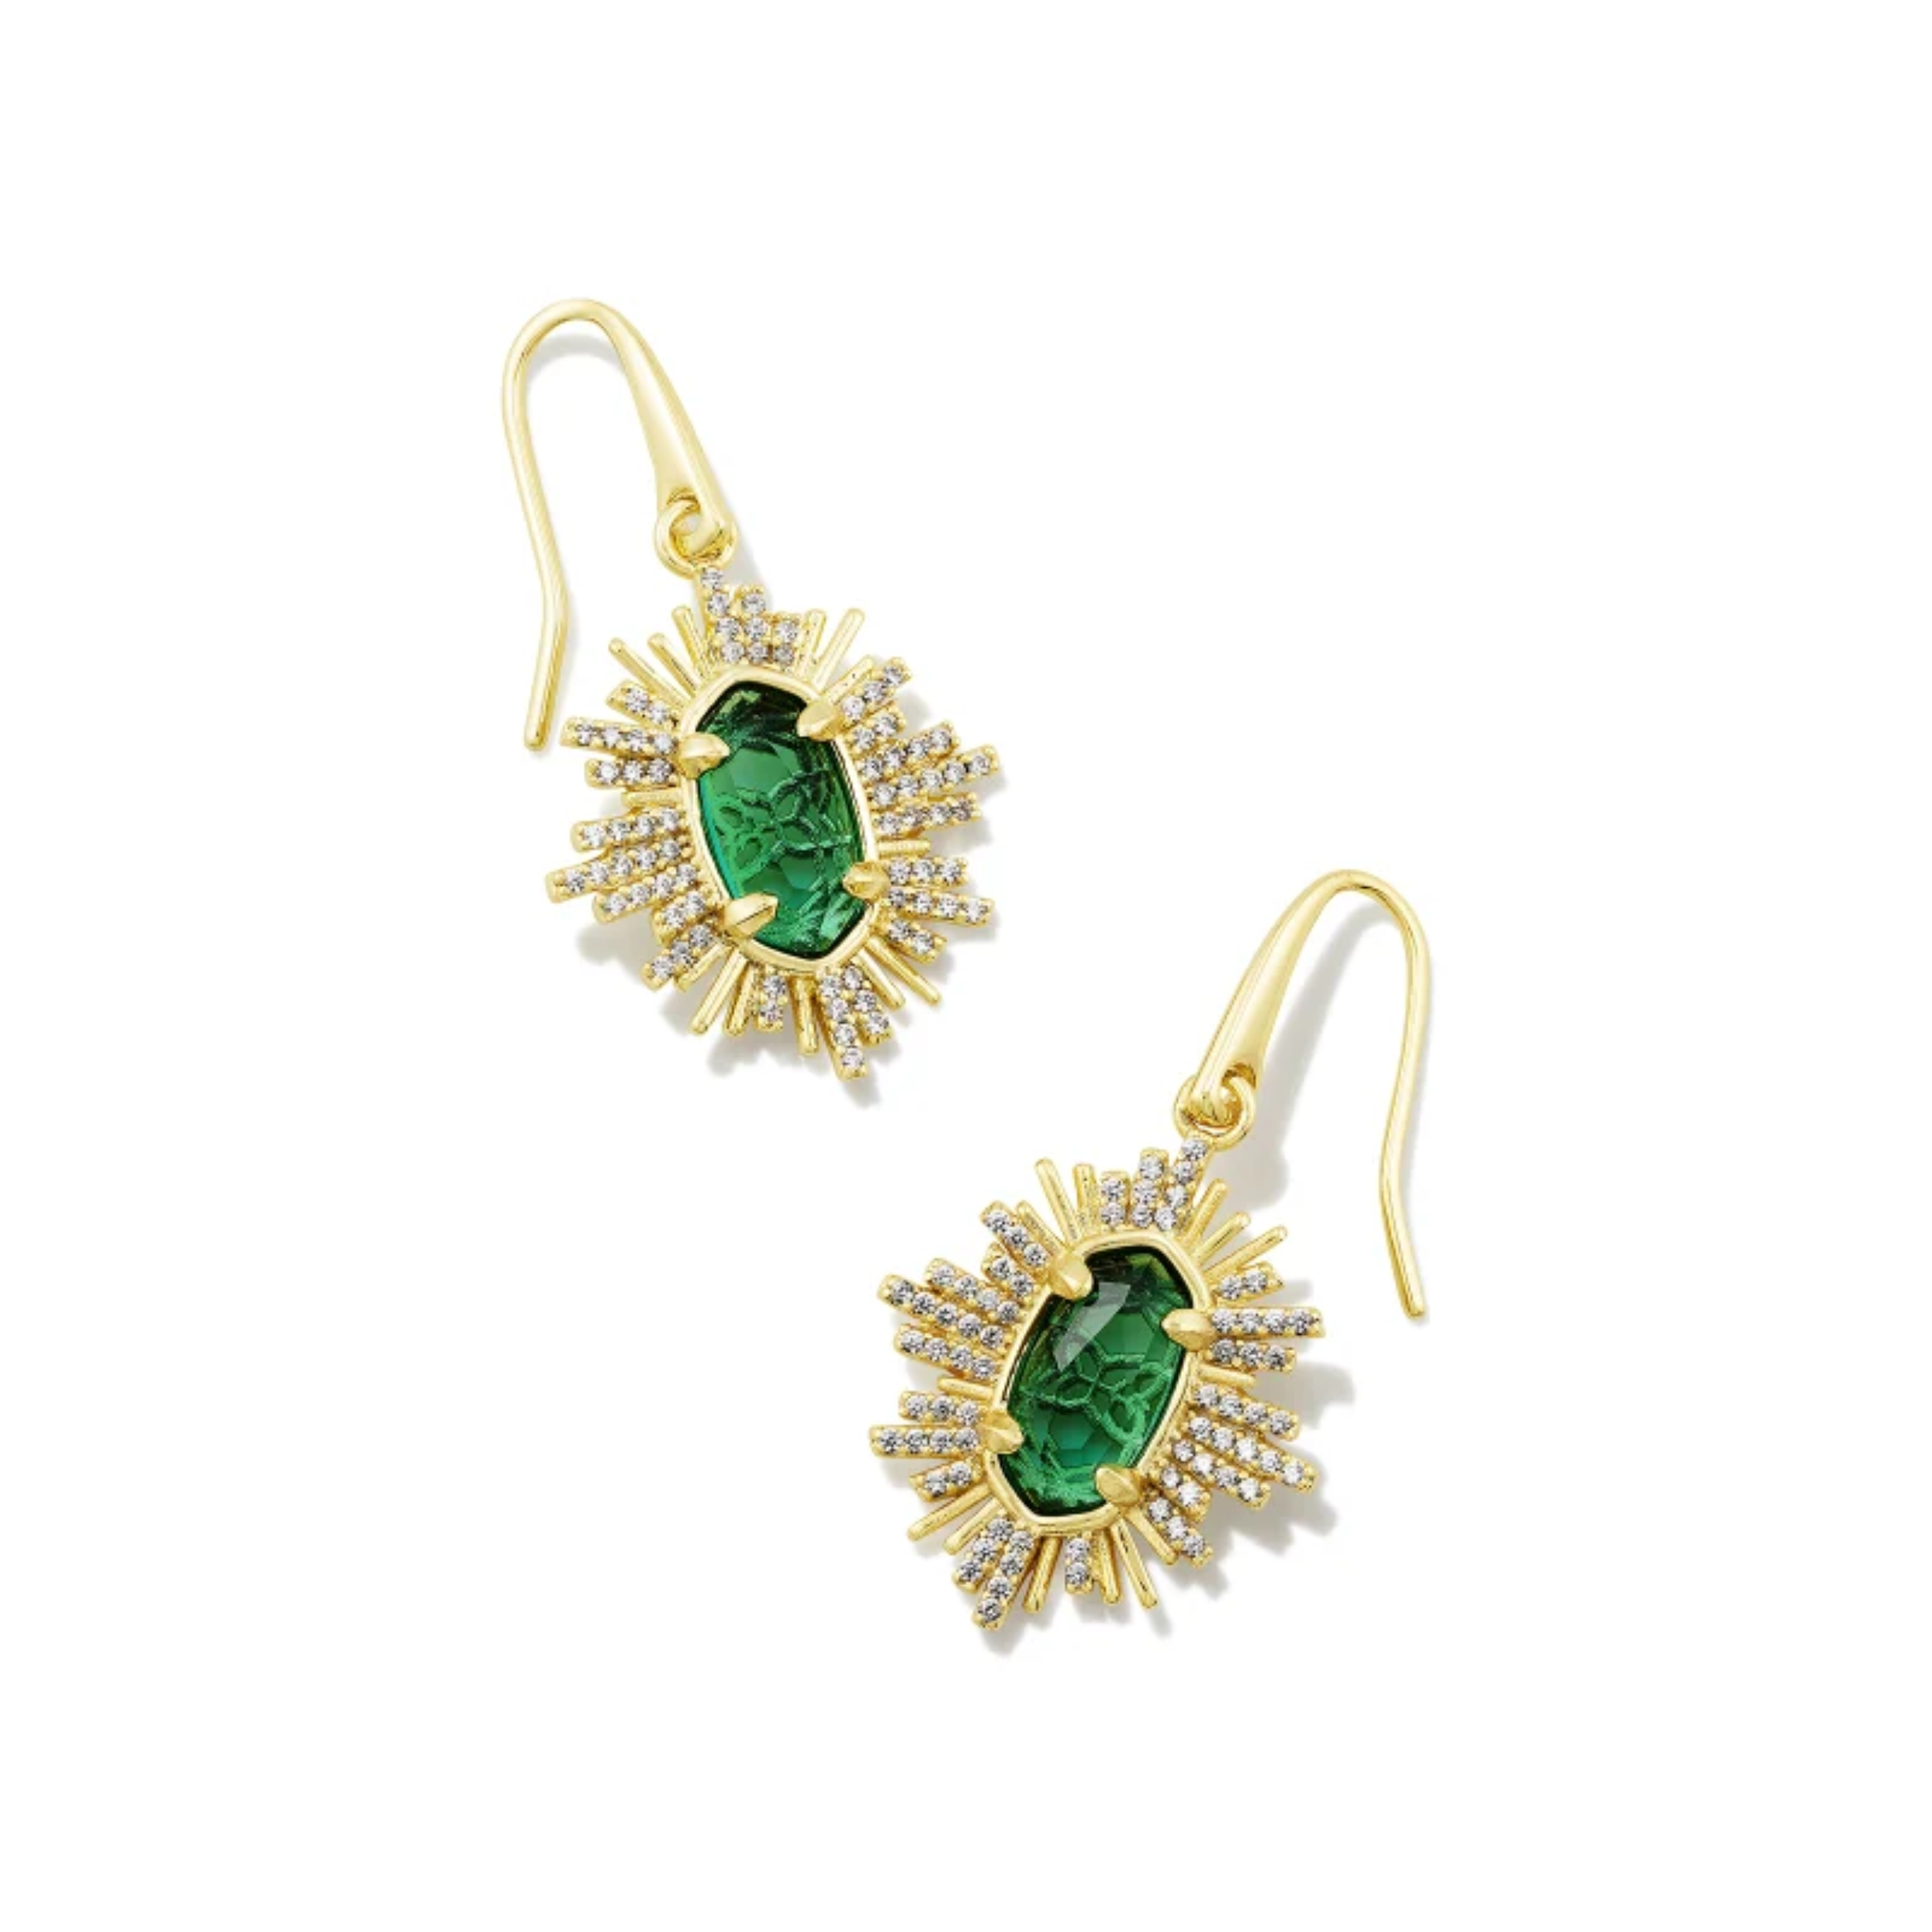 These Grayson Gold Sunburst Drop Earrings in Green Glass by Kendra Scott are pictured on a white background.